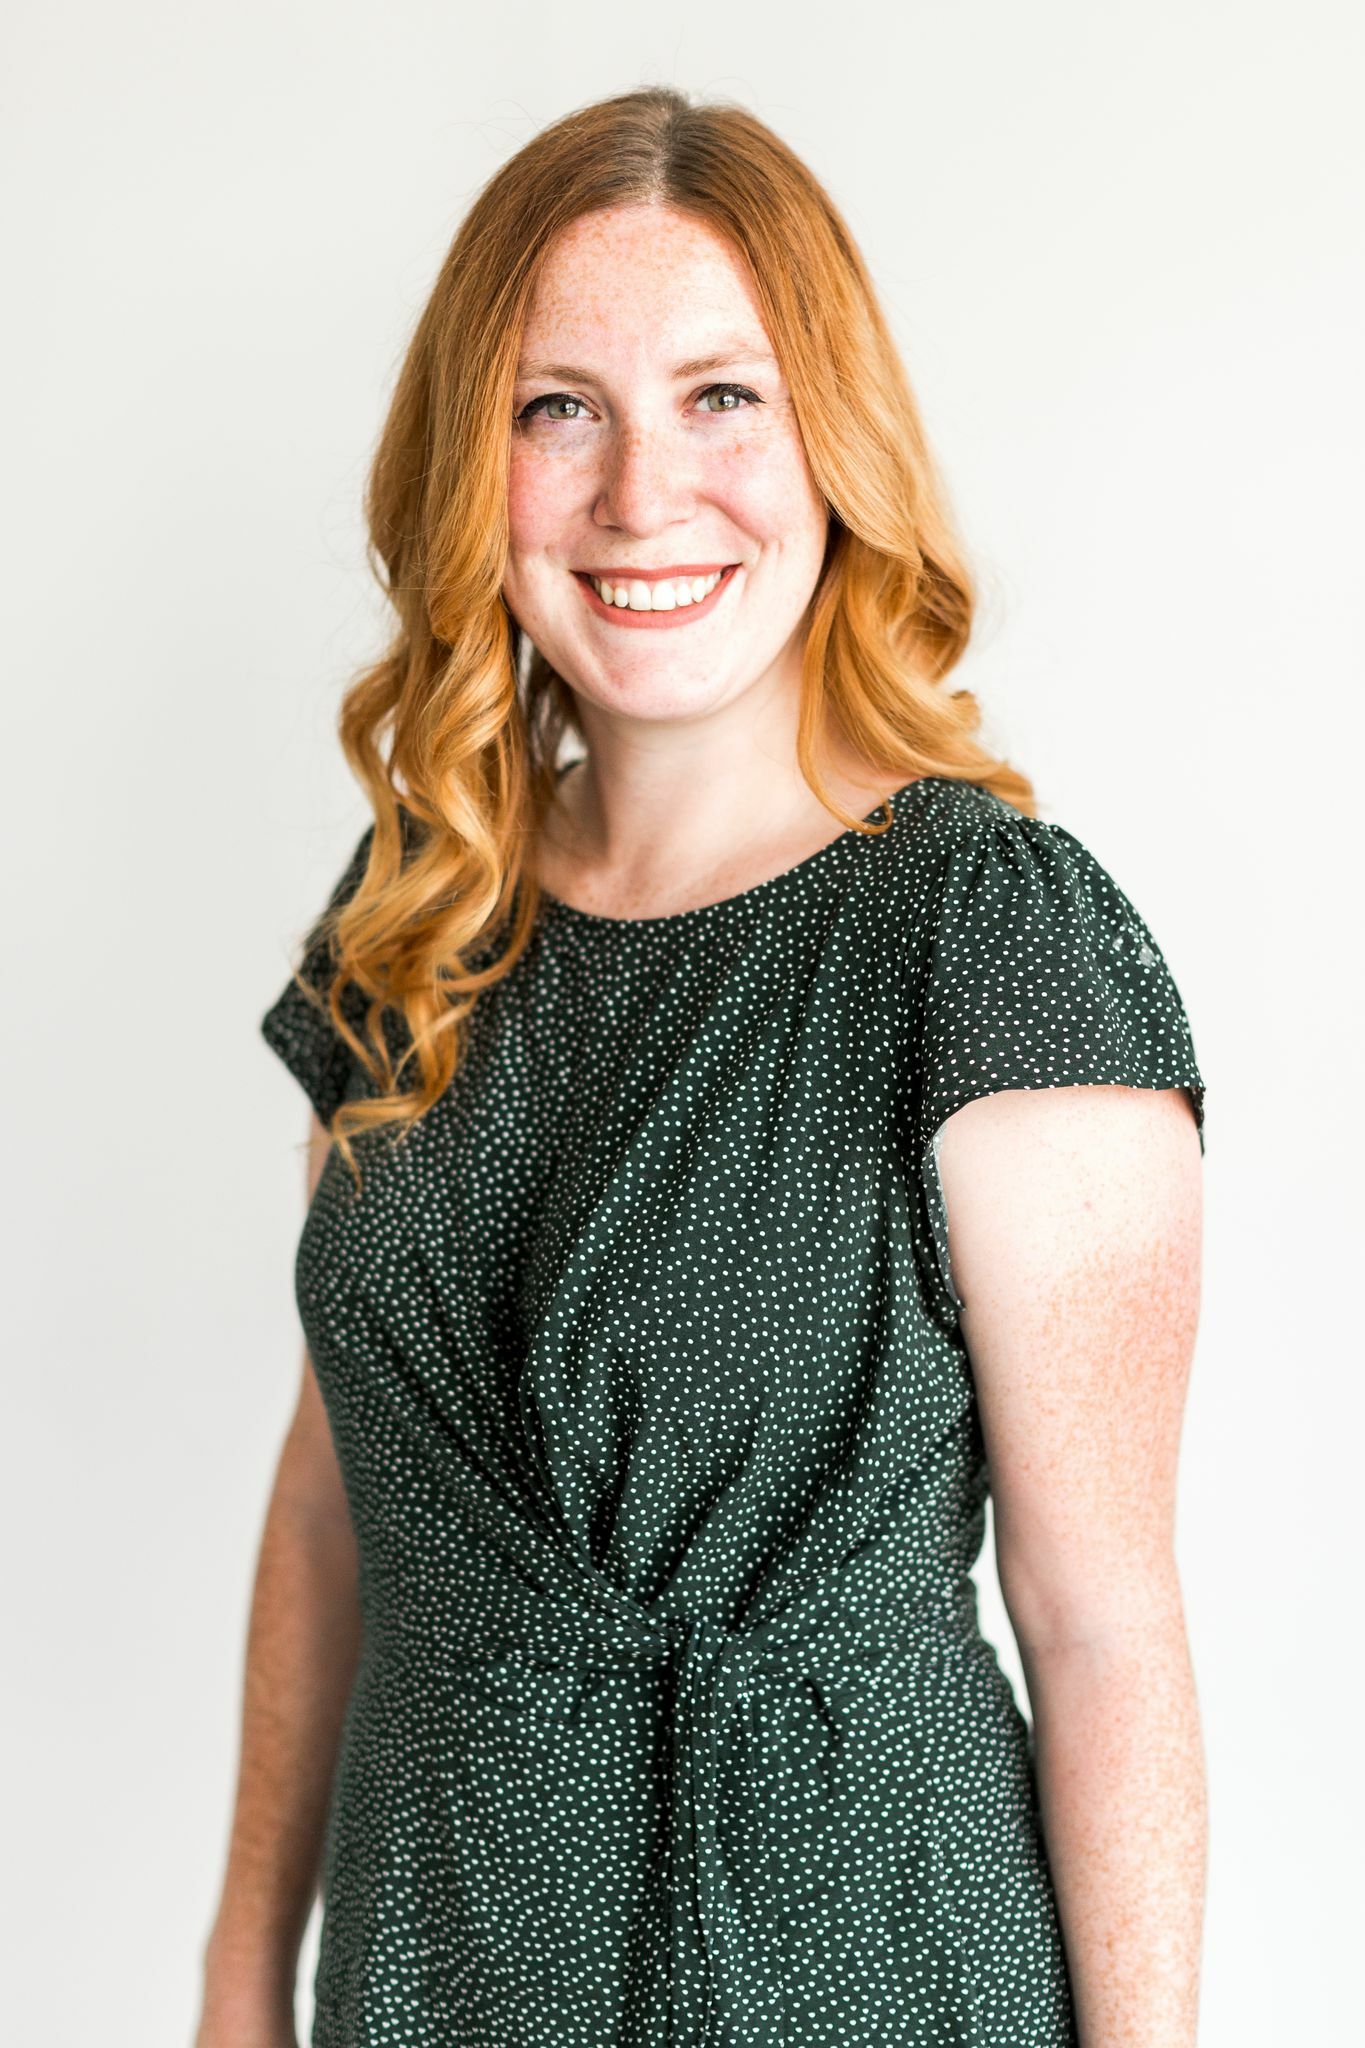 A person with shoulder length red hair wearing a green dress smiles at the camera